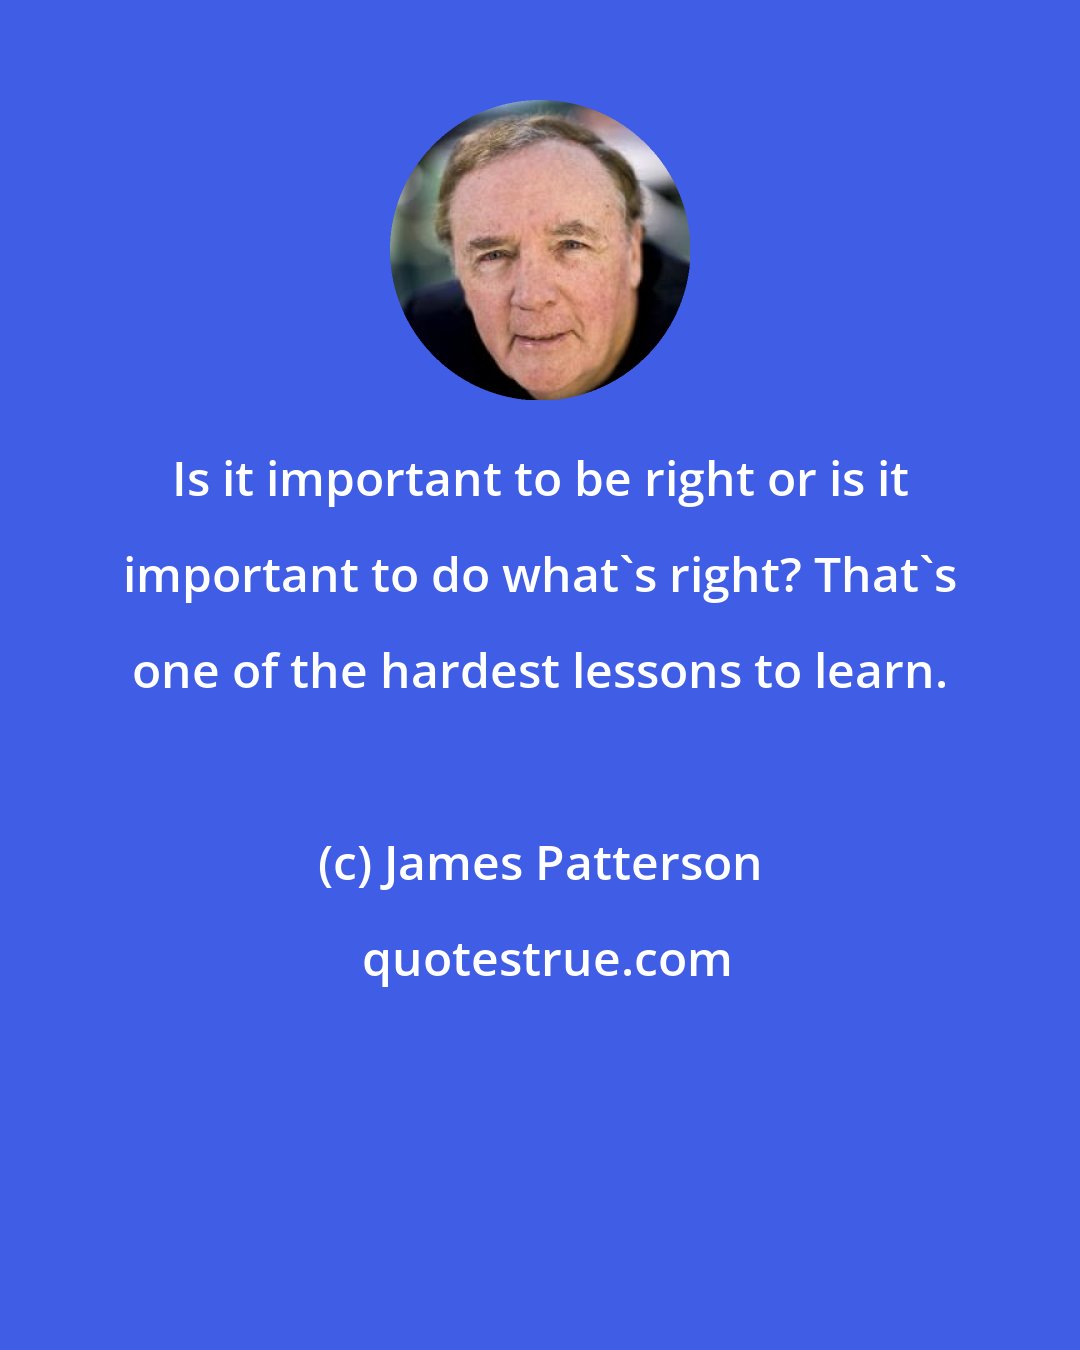 James Patterson: Is it important to be right or is it important to do what's right? That's one of the hardest lessons to learn.